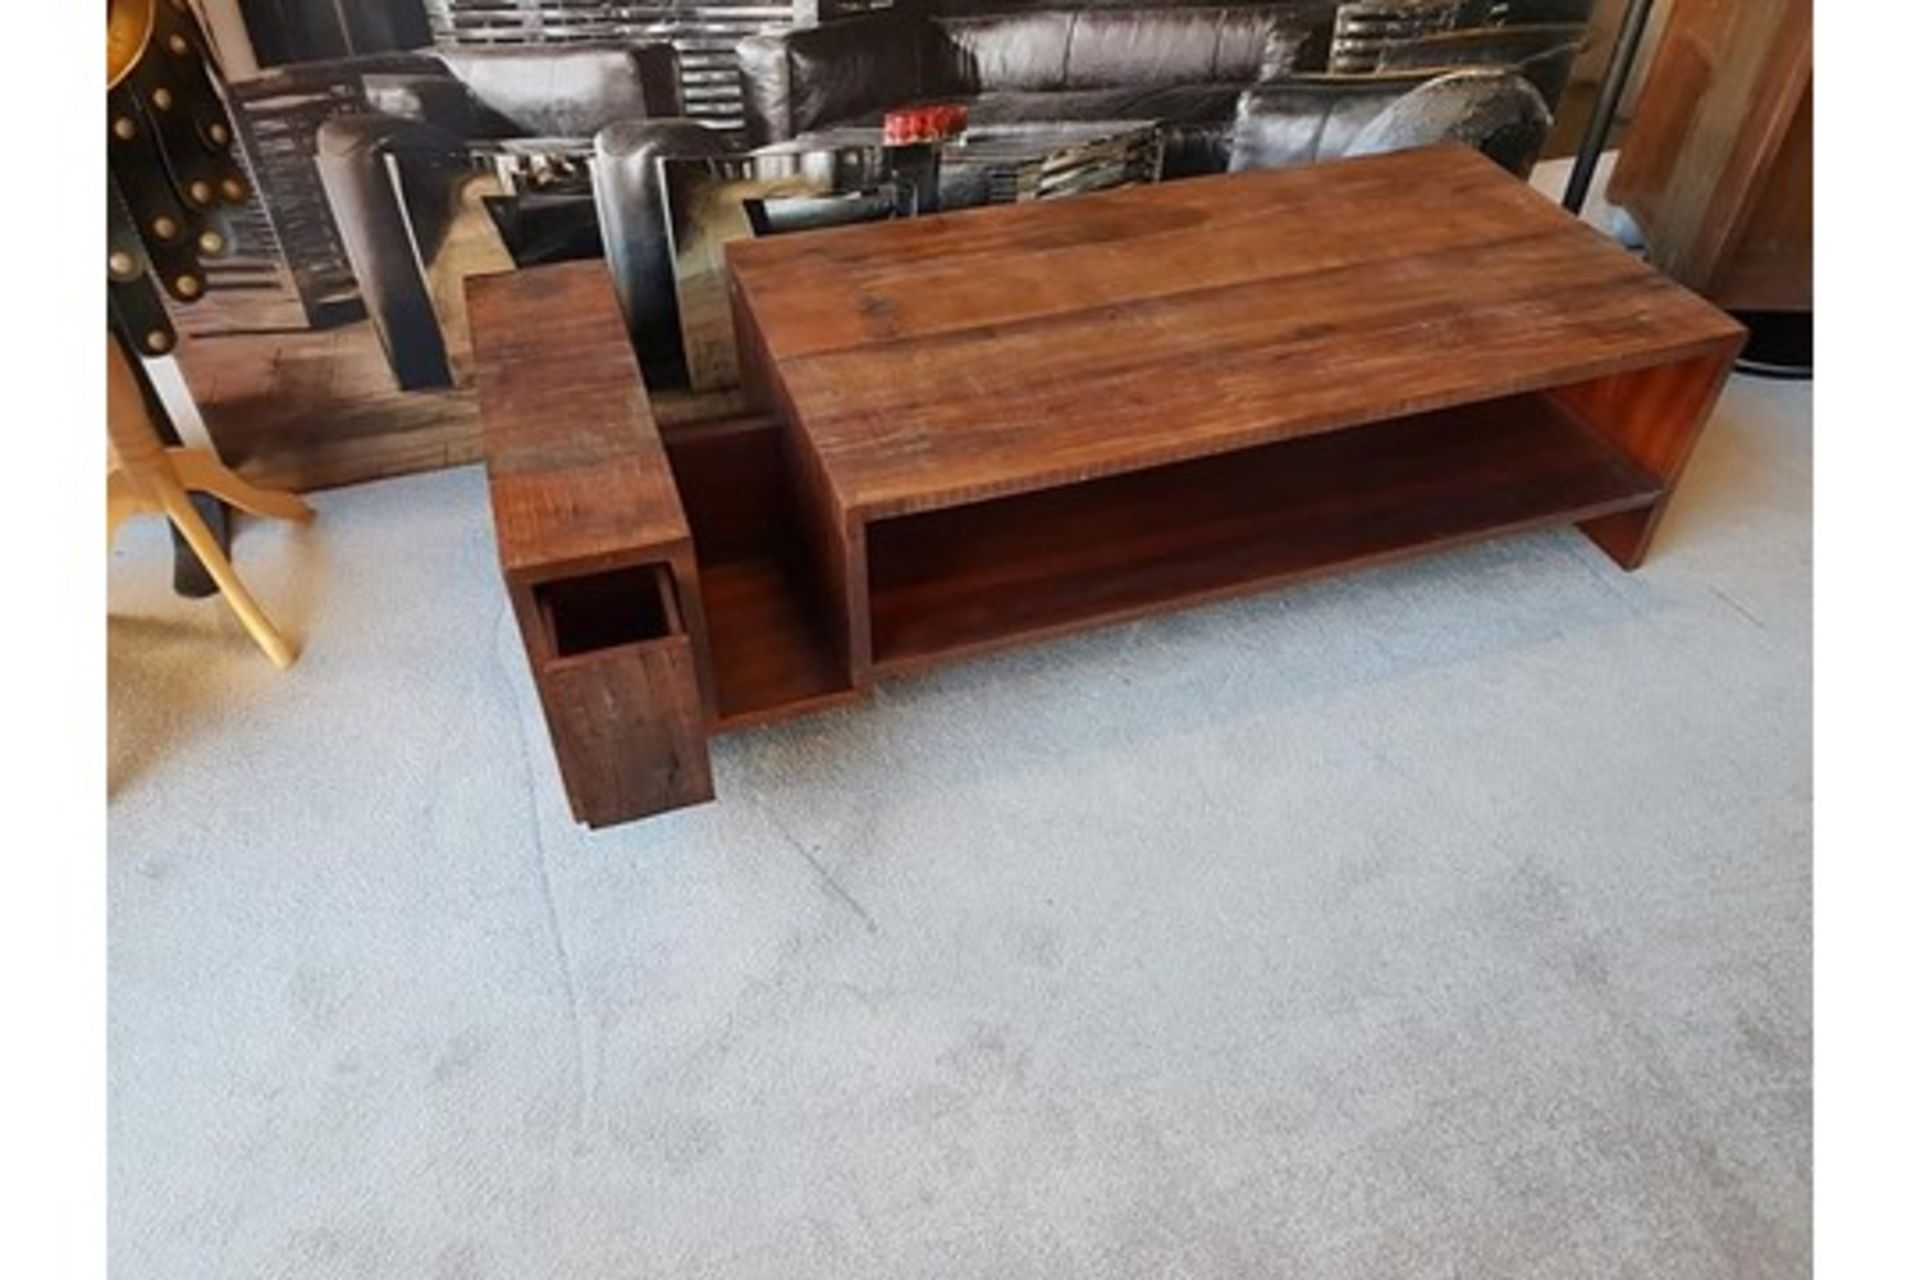 Hand Crafted Exotic Solid Hardwood Coffee Table The Avett Balances Modern Design With Sustainability